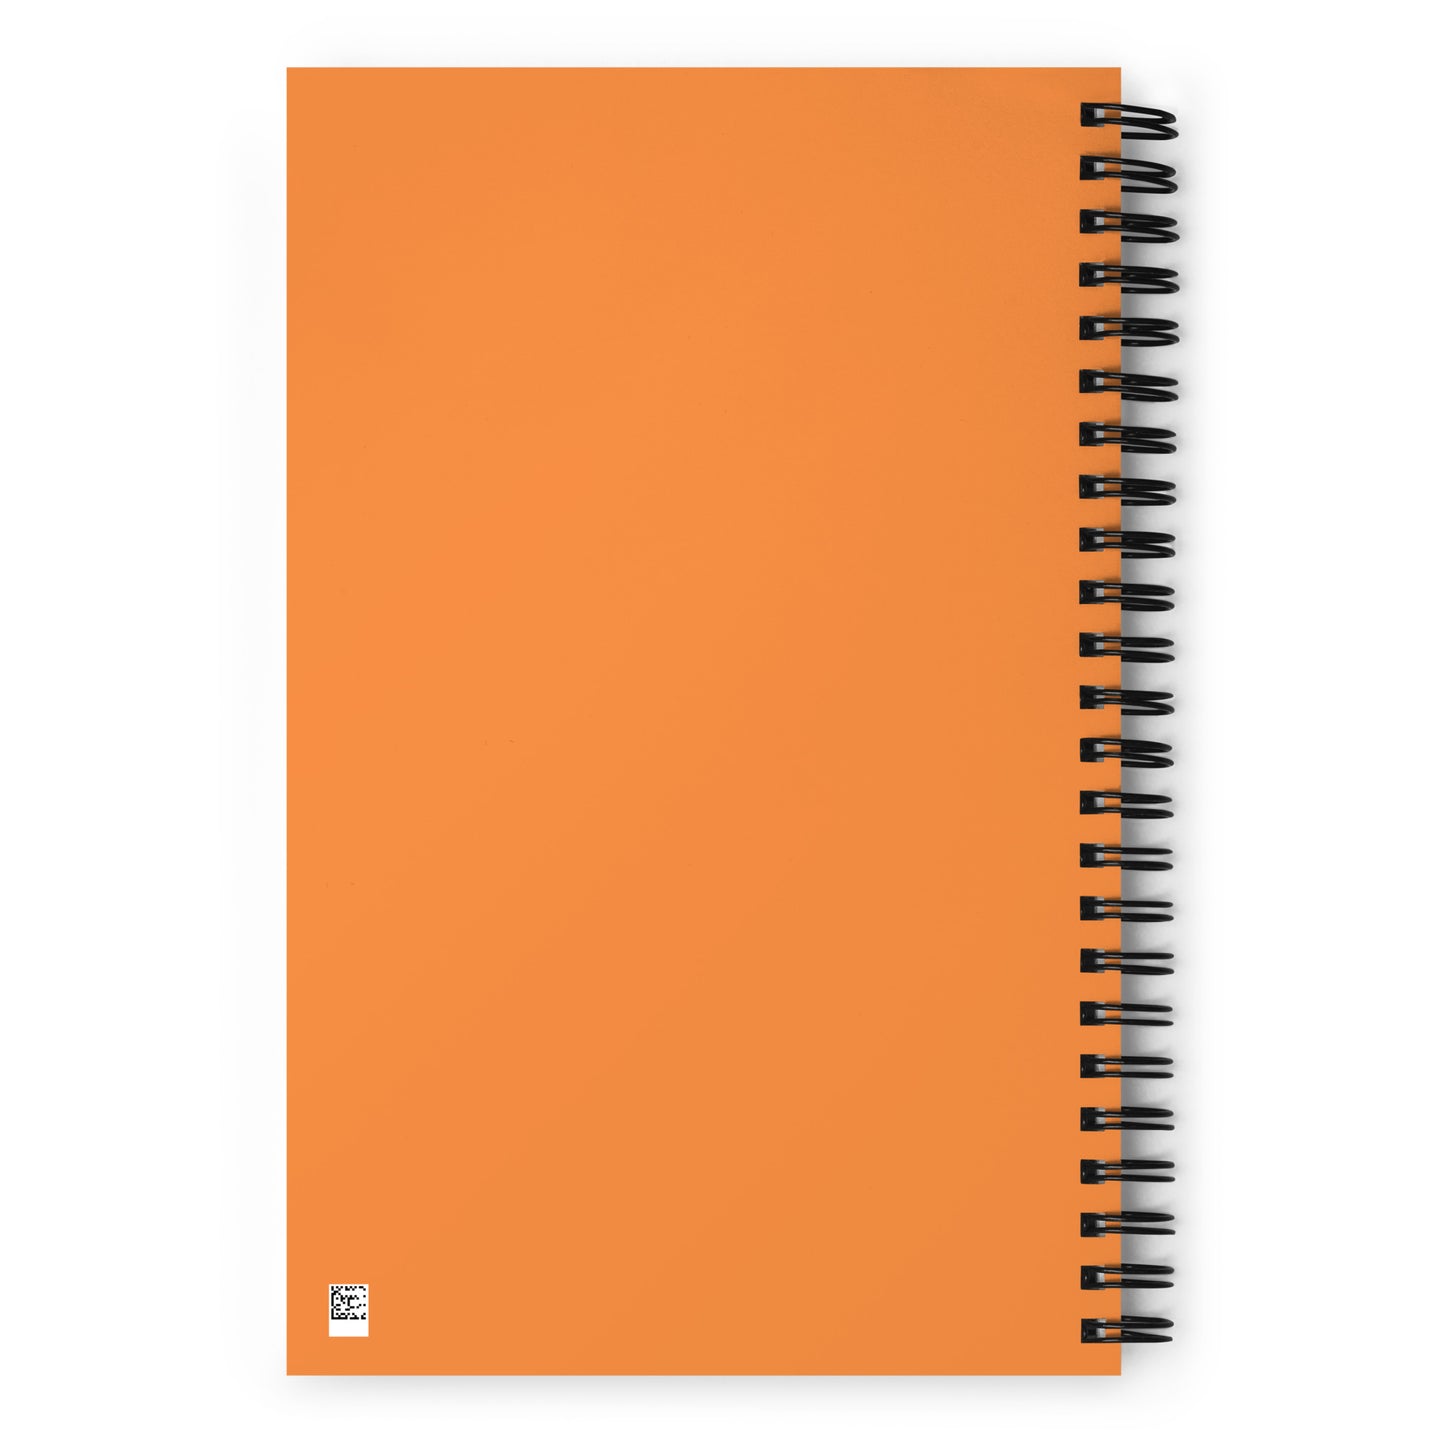 When I'm an Astronaut Spiral Soft-touch 140-page Notebook B